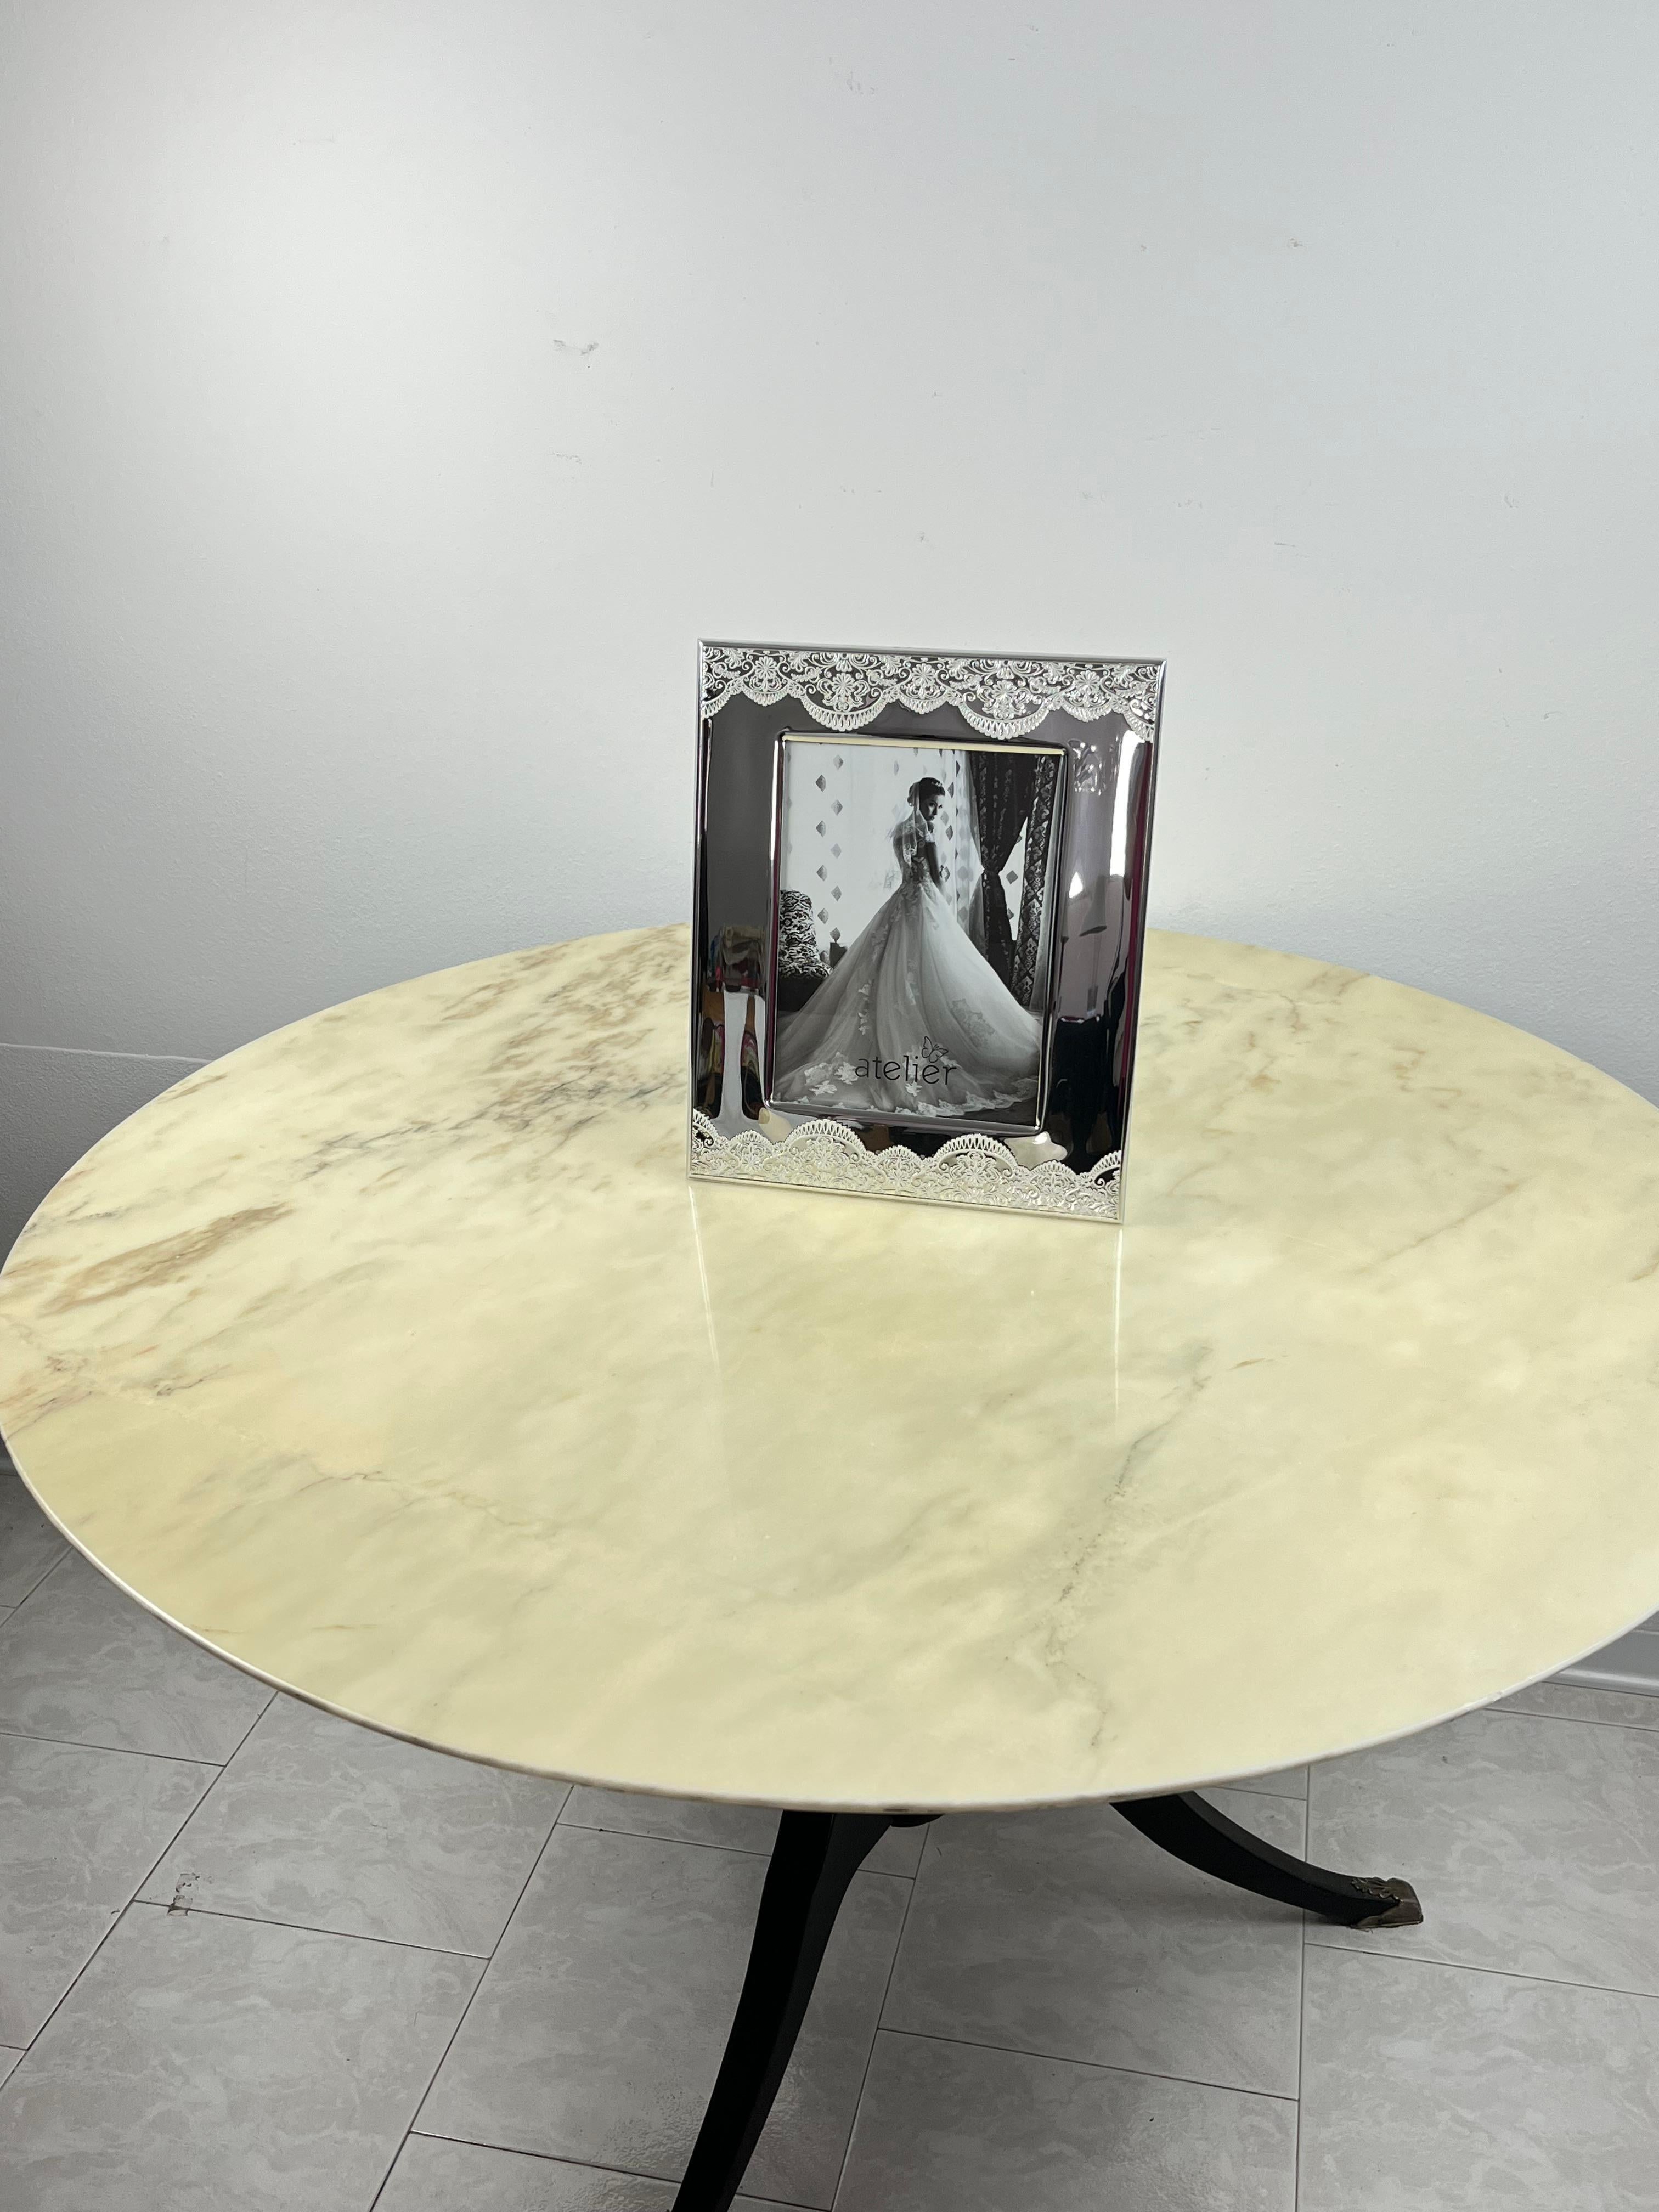 Silver plate photo frame/mirror, lace design, new
Brand new workmanship, Italian production from 2023, it has an enamelled design as if it were lace. Equipped with a mirror, it can be used as a photo frame or table mirror. It has its box and gift